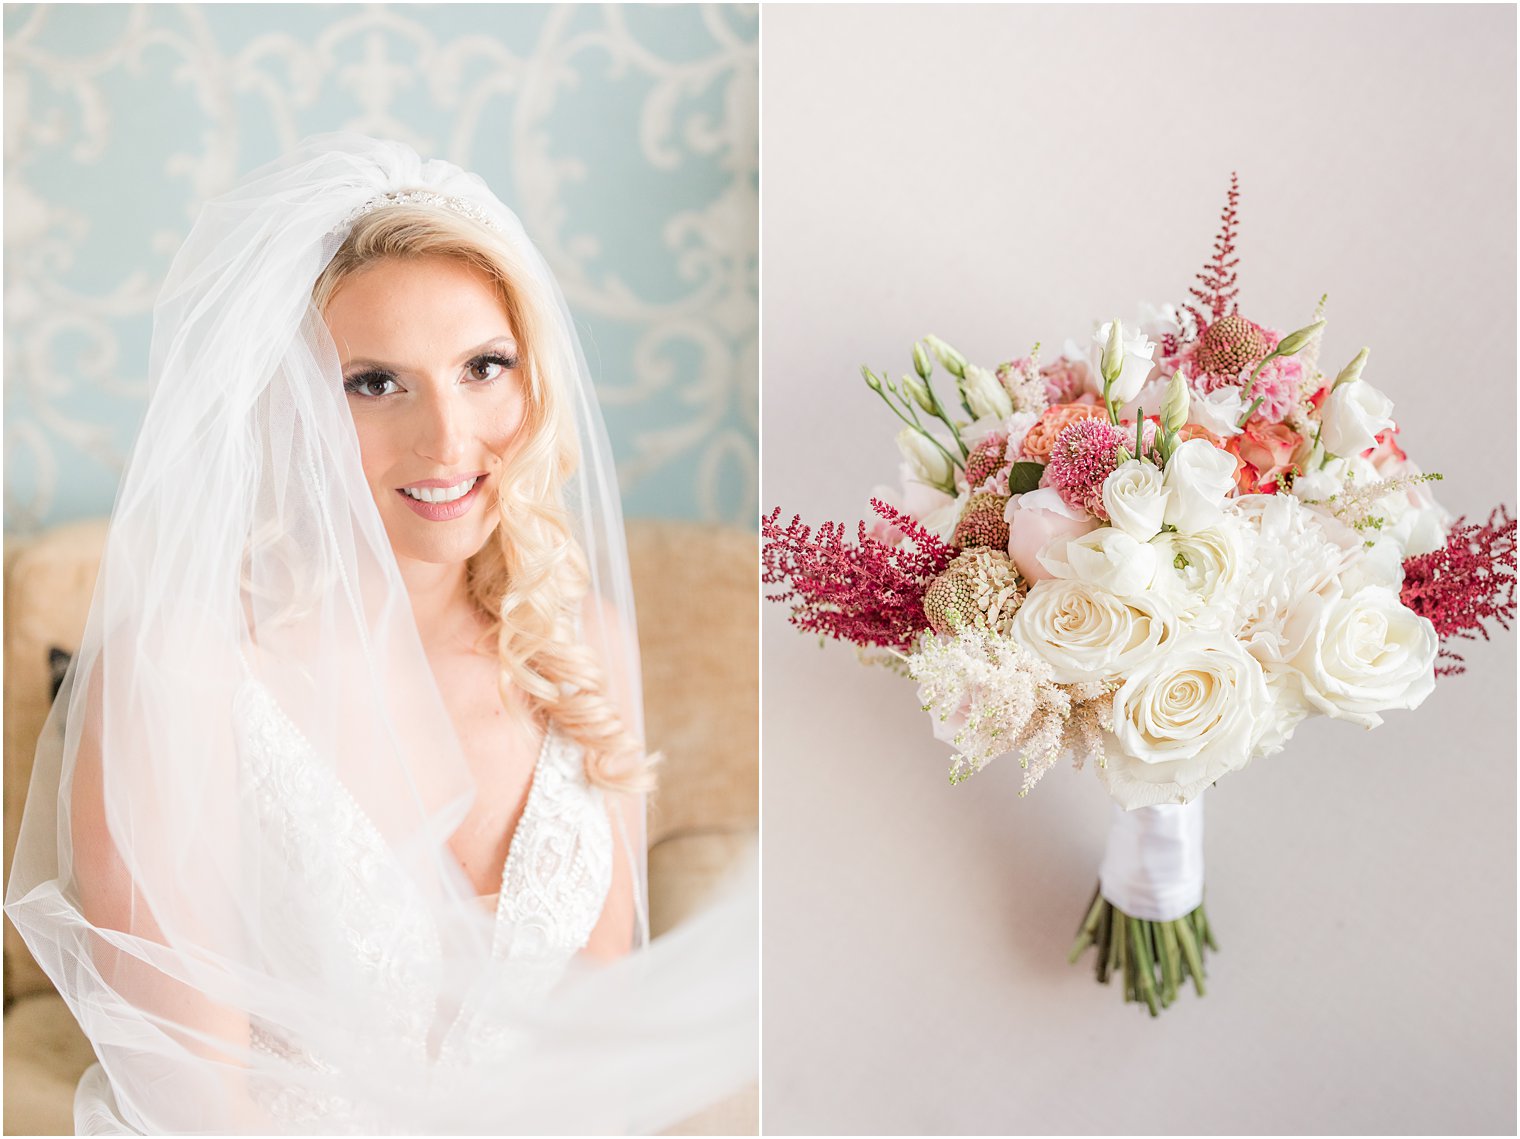 veil drapes around bride for classic portrait in the Molly Pitcher Inn bridal suite 